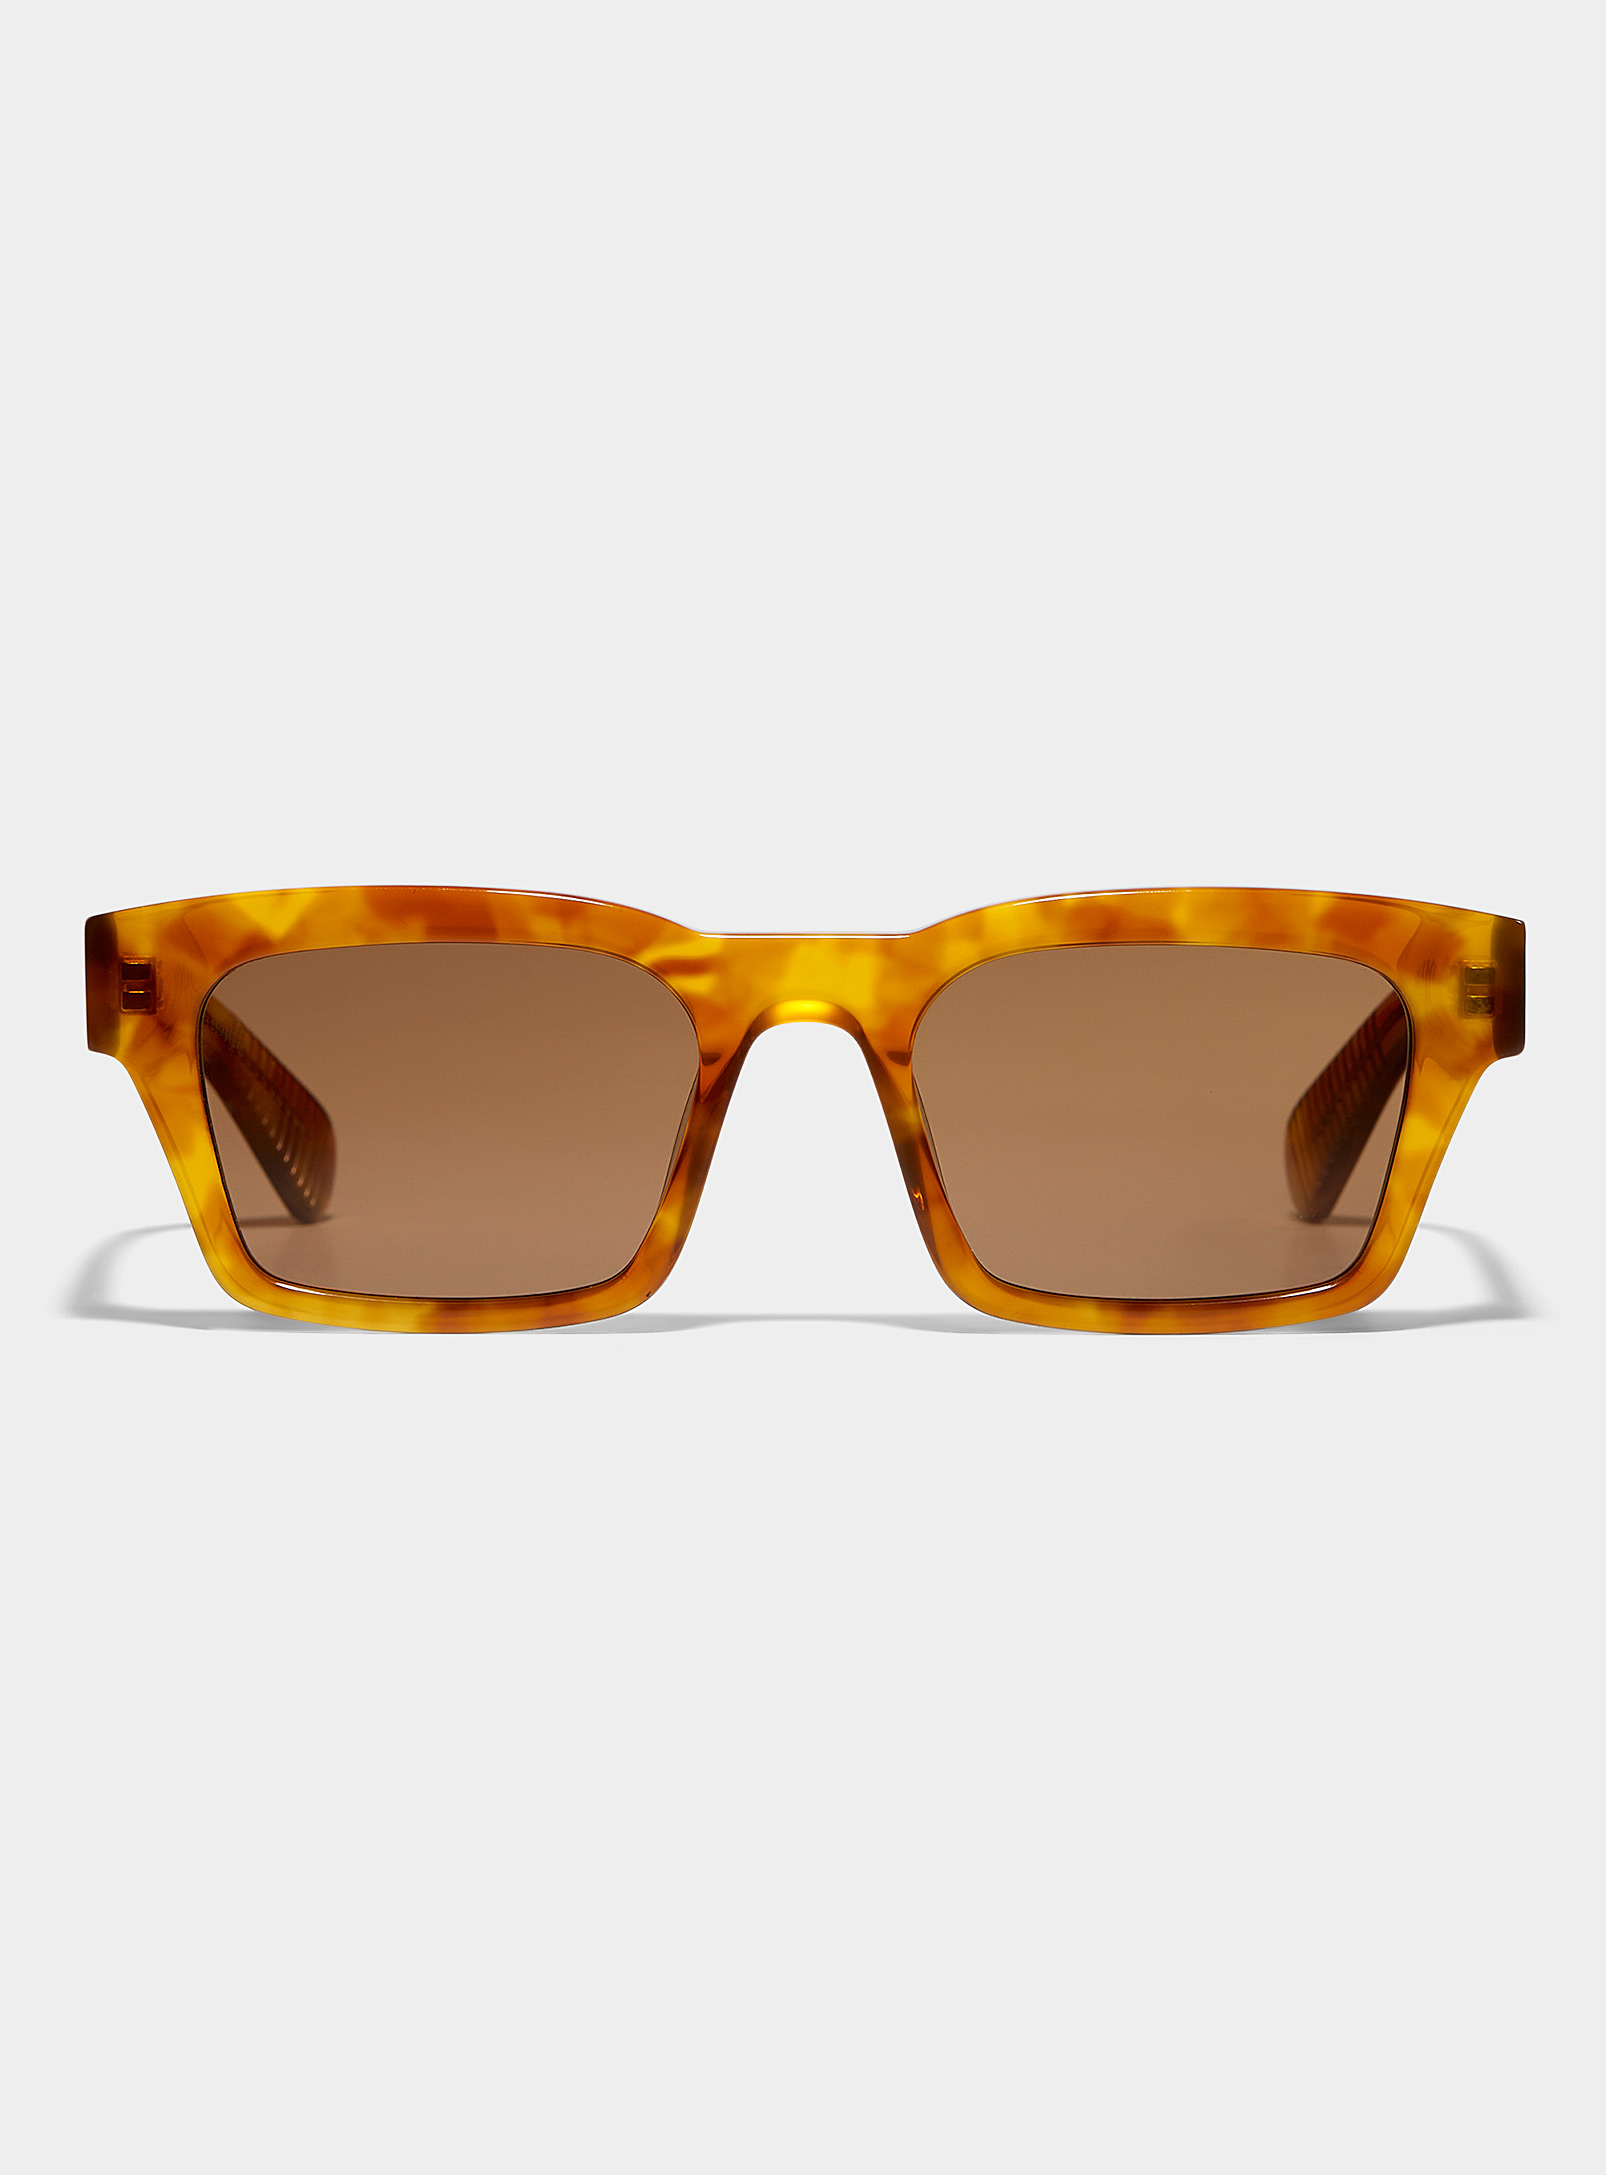 Spitfire Cut Eighty Two Rectangular Sunglasses In Brown